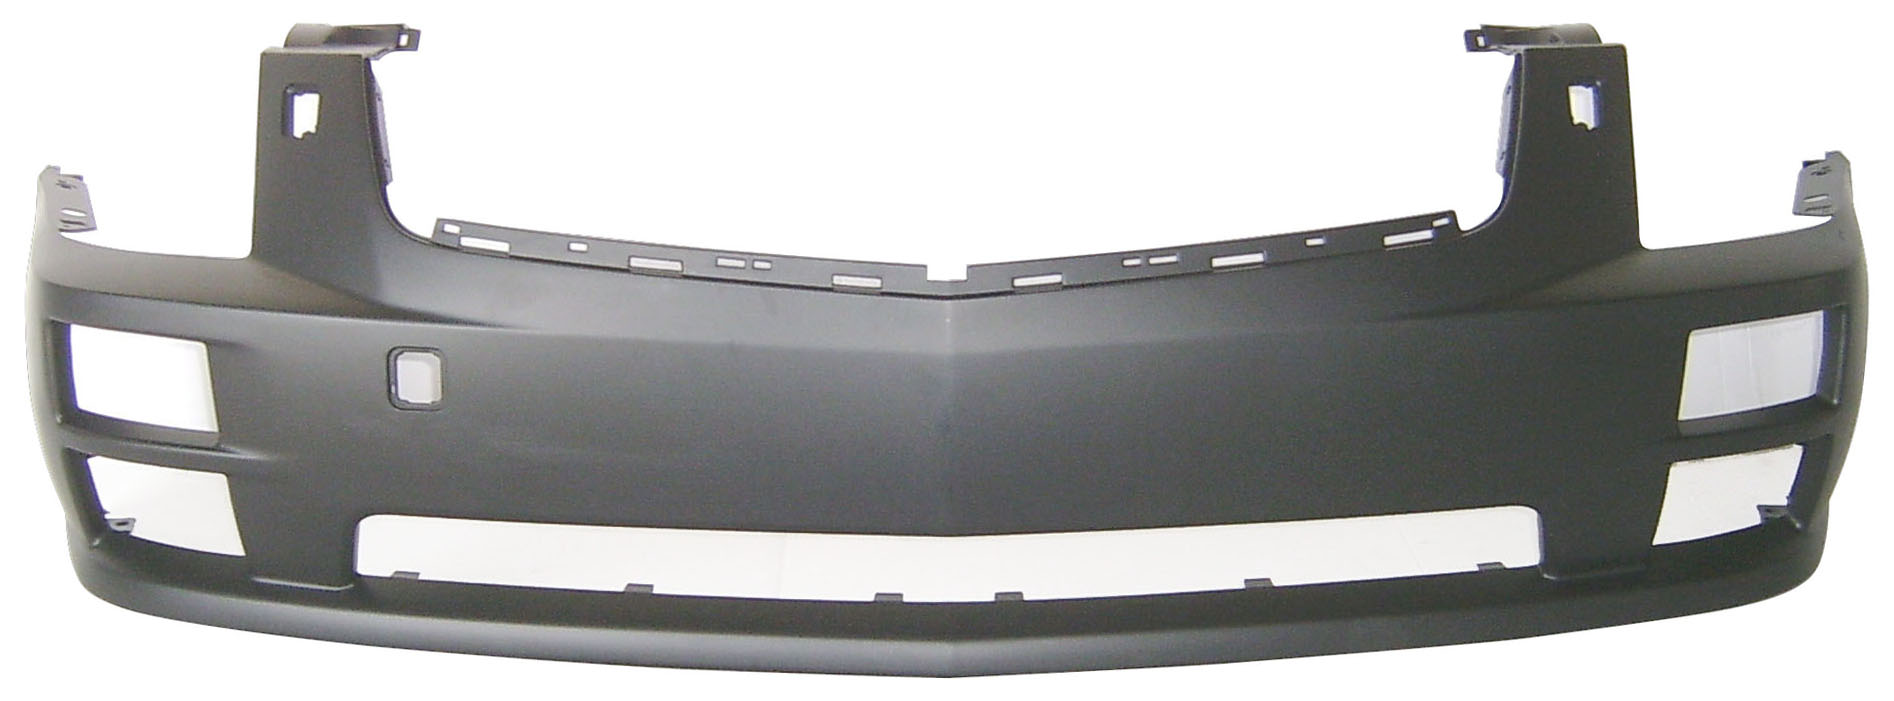 Aftermarket BUMPER COVERS for CADILLAC - STS, STS,05-07,Front bumper cover